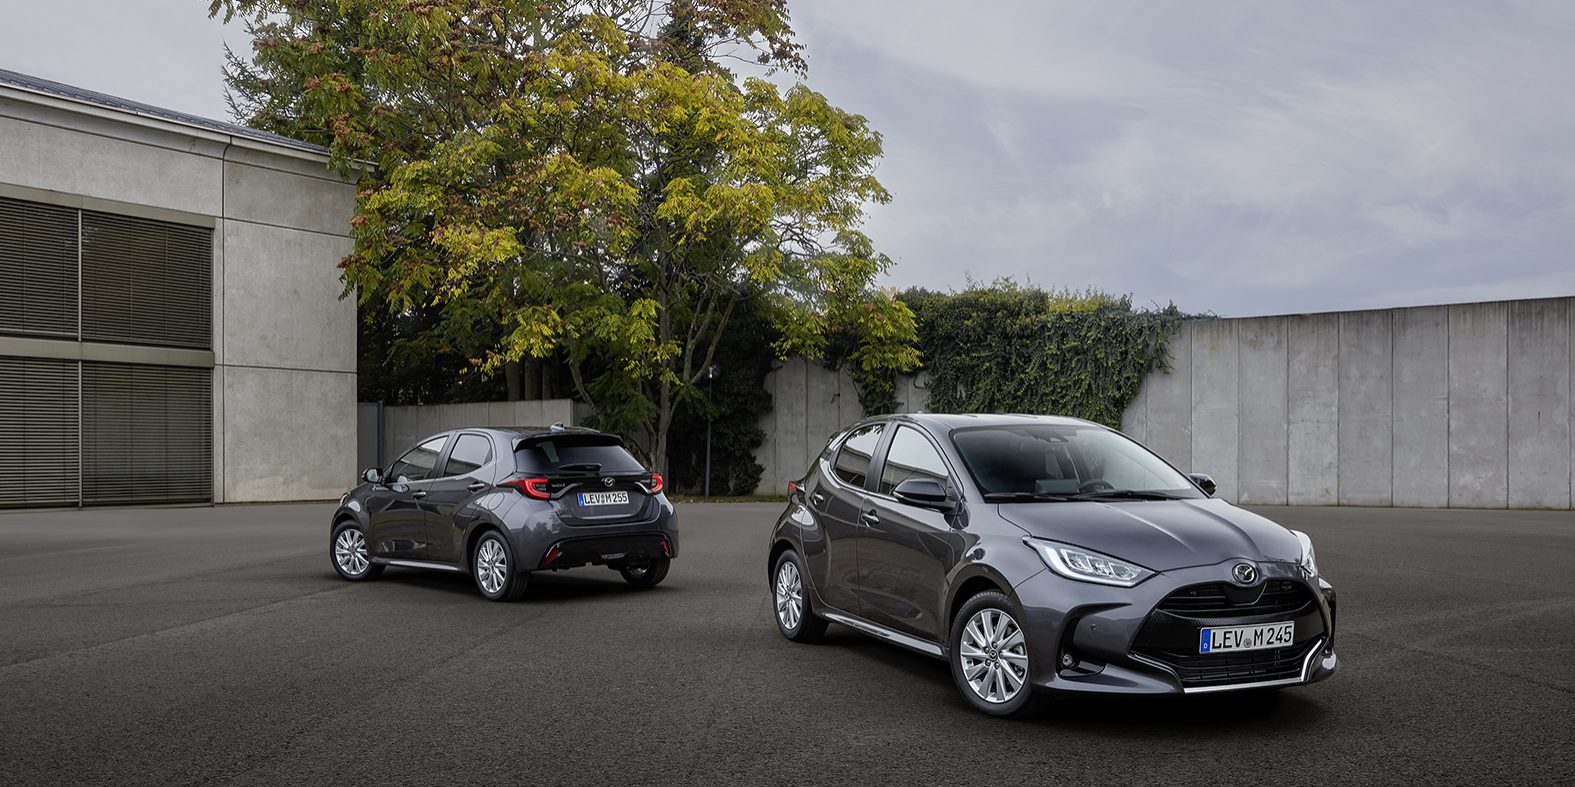 Mazda2 Hybrid to be Introduced in Europe